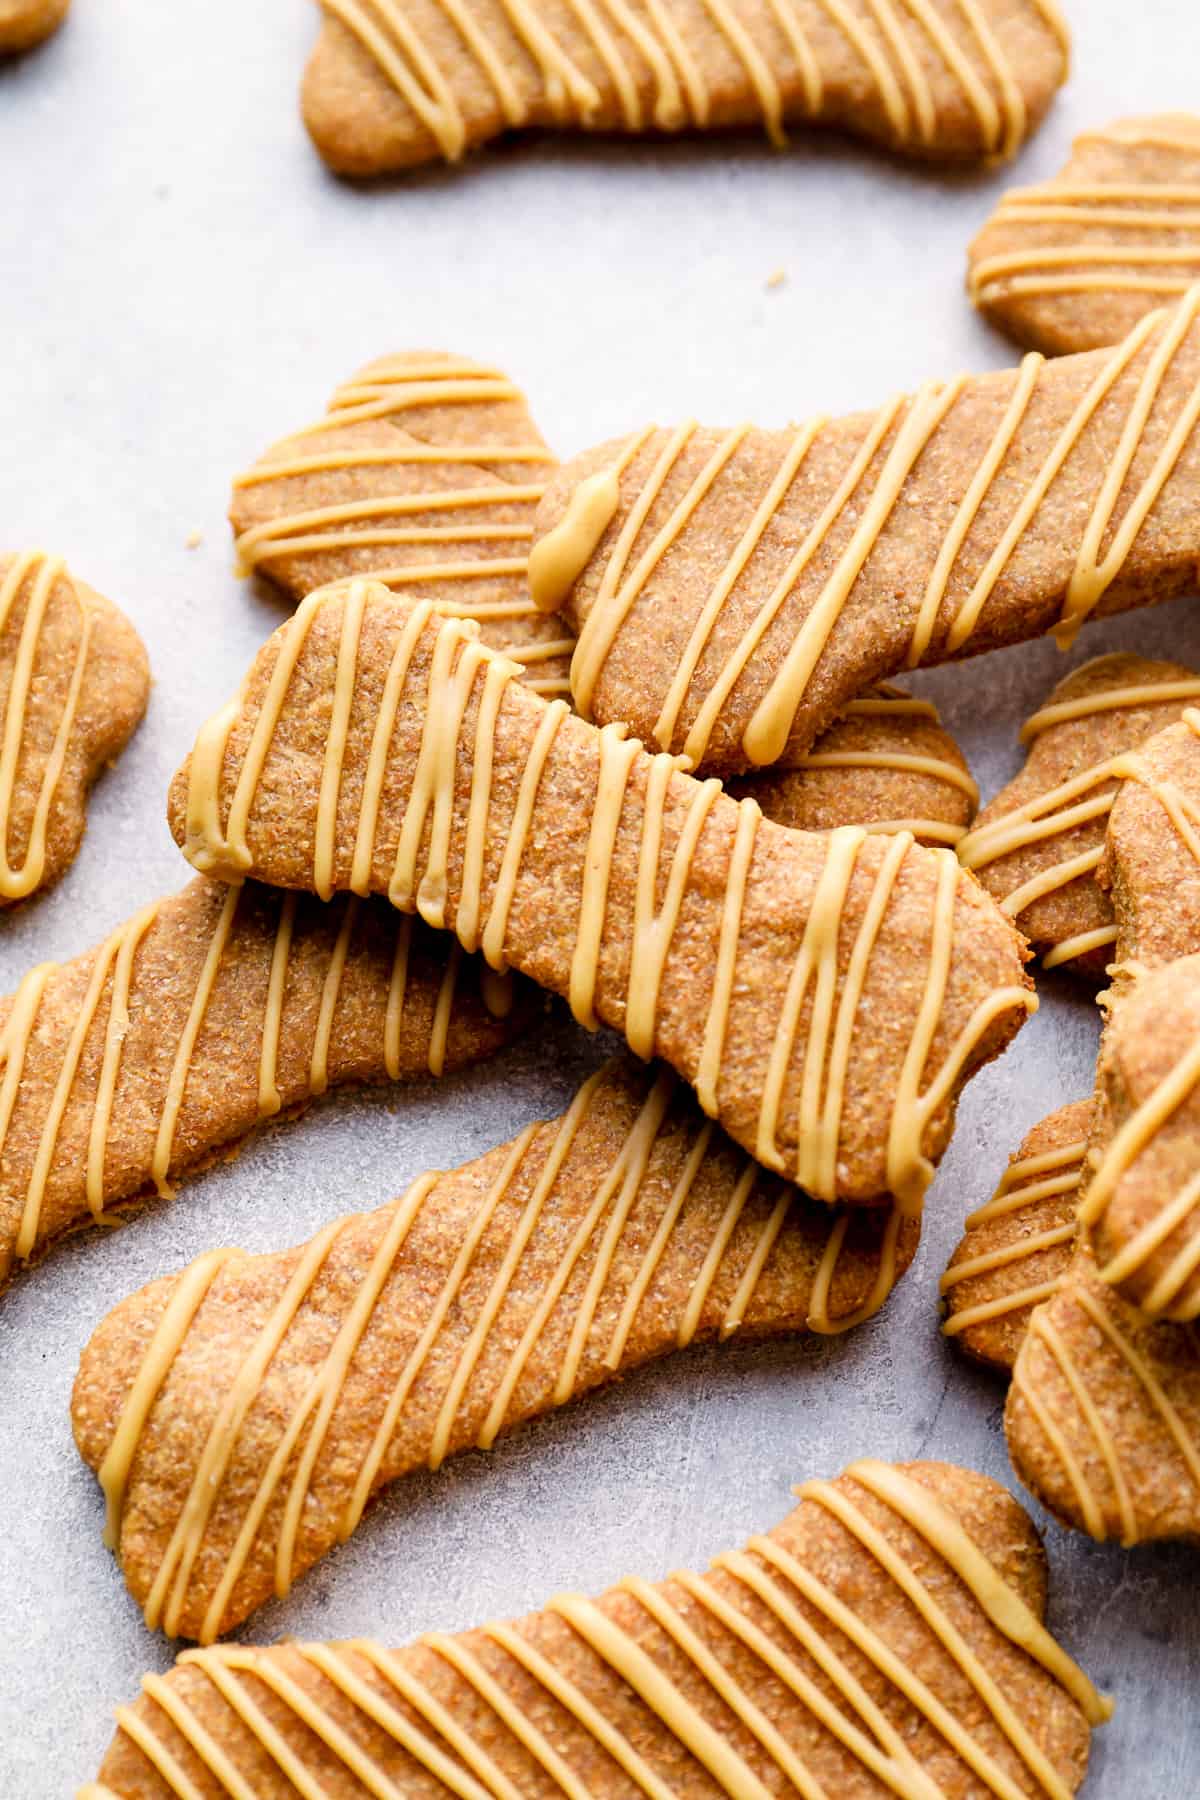 homemade dog treats drizzled with dog friendly icing